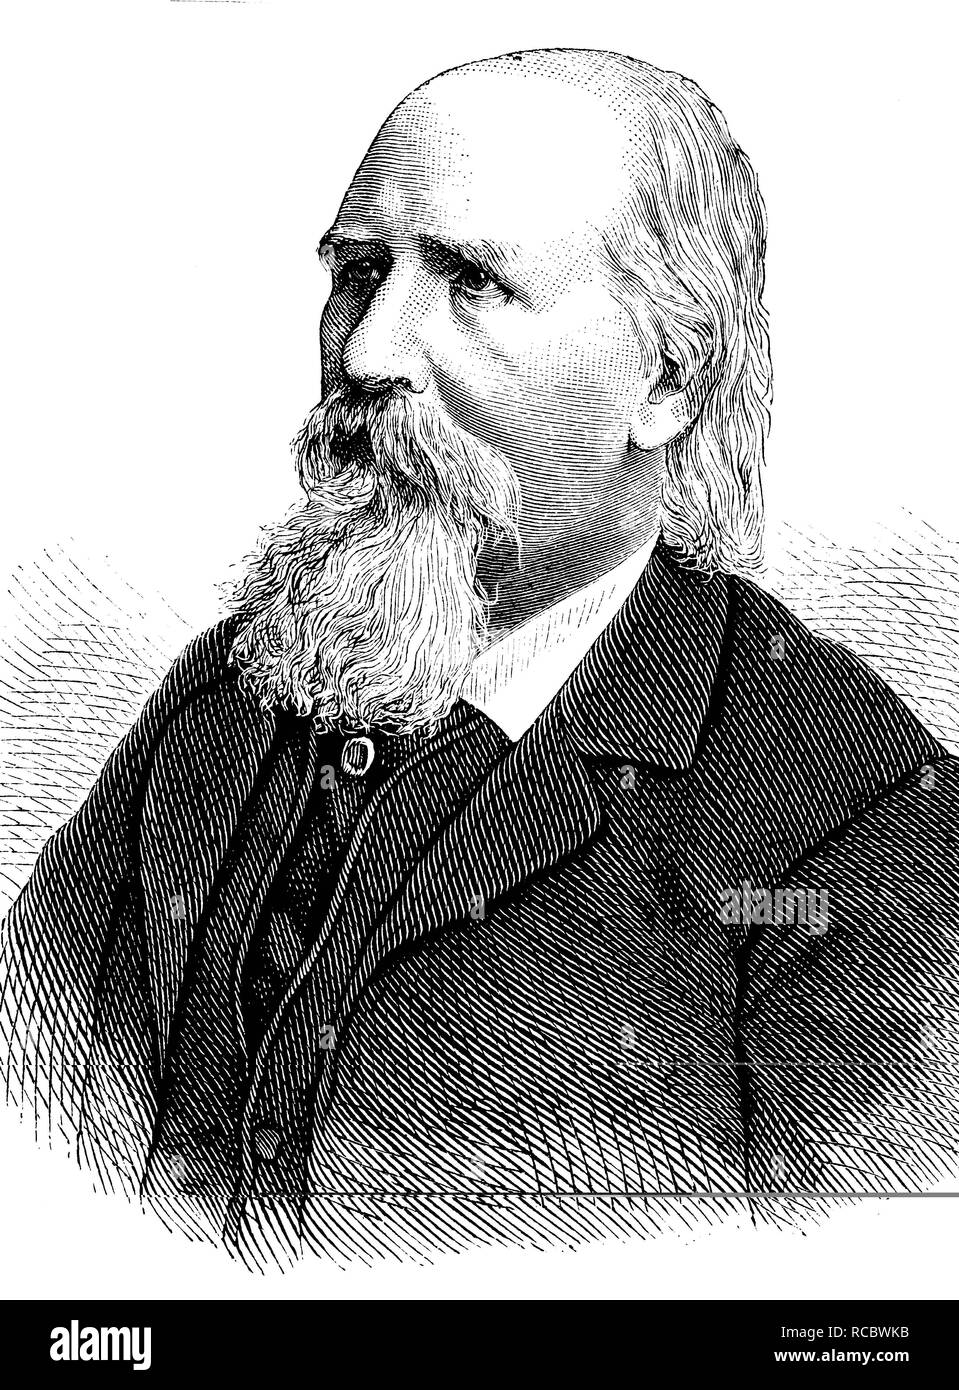 Franz Emanuel August Geibel, 1815-1884, a German poet, historic engraving, about 1888 Stock Photo